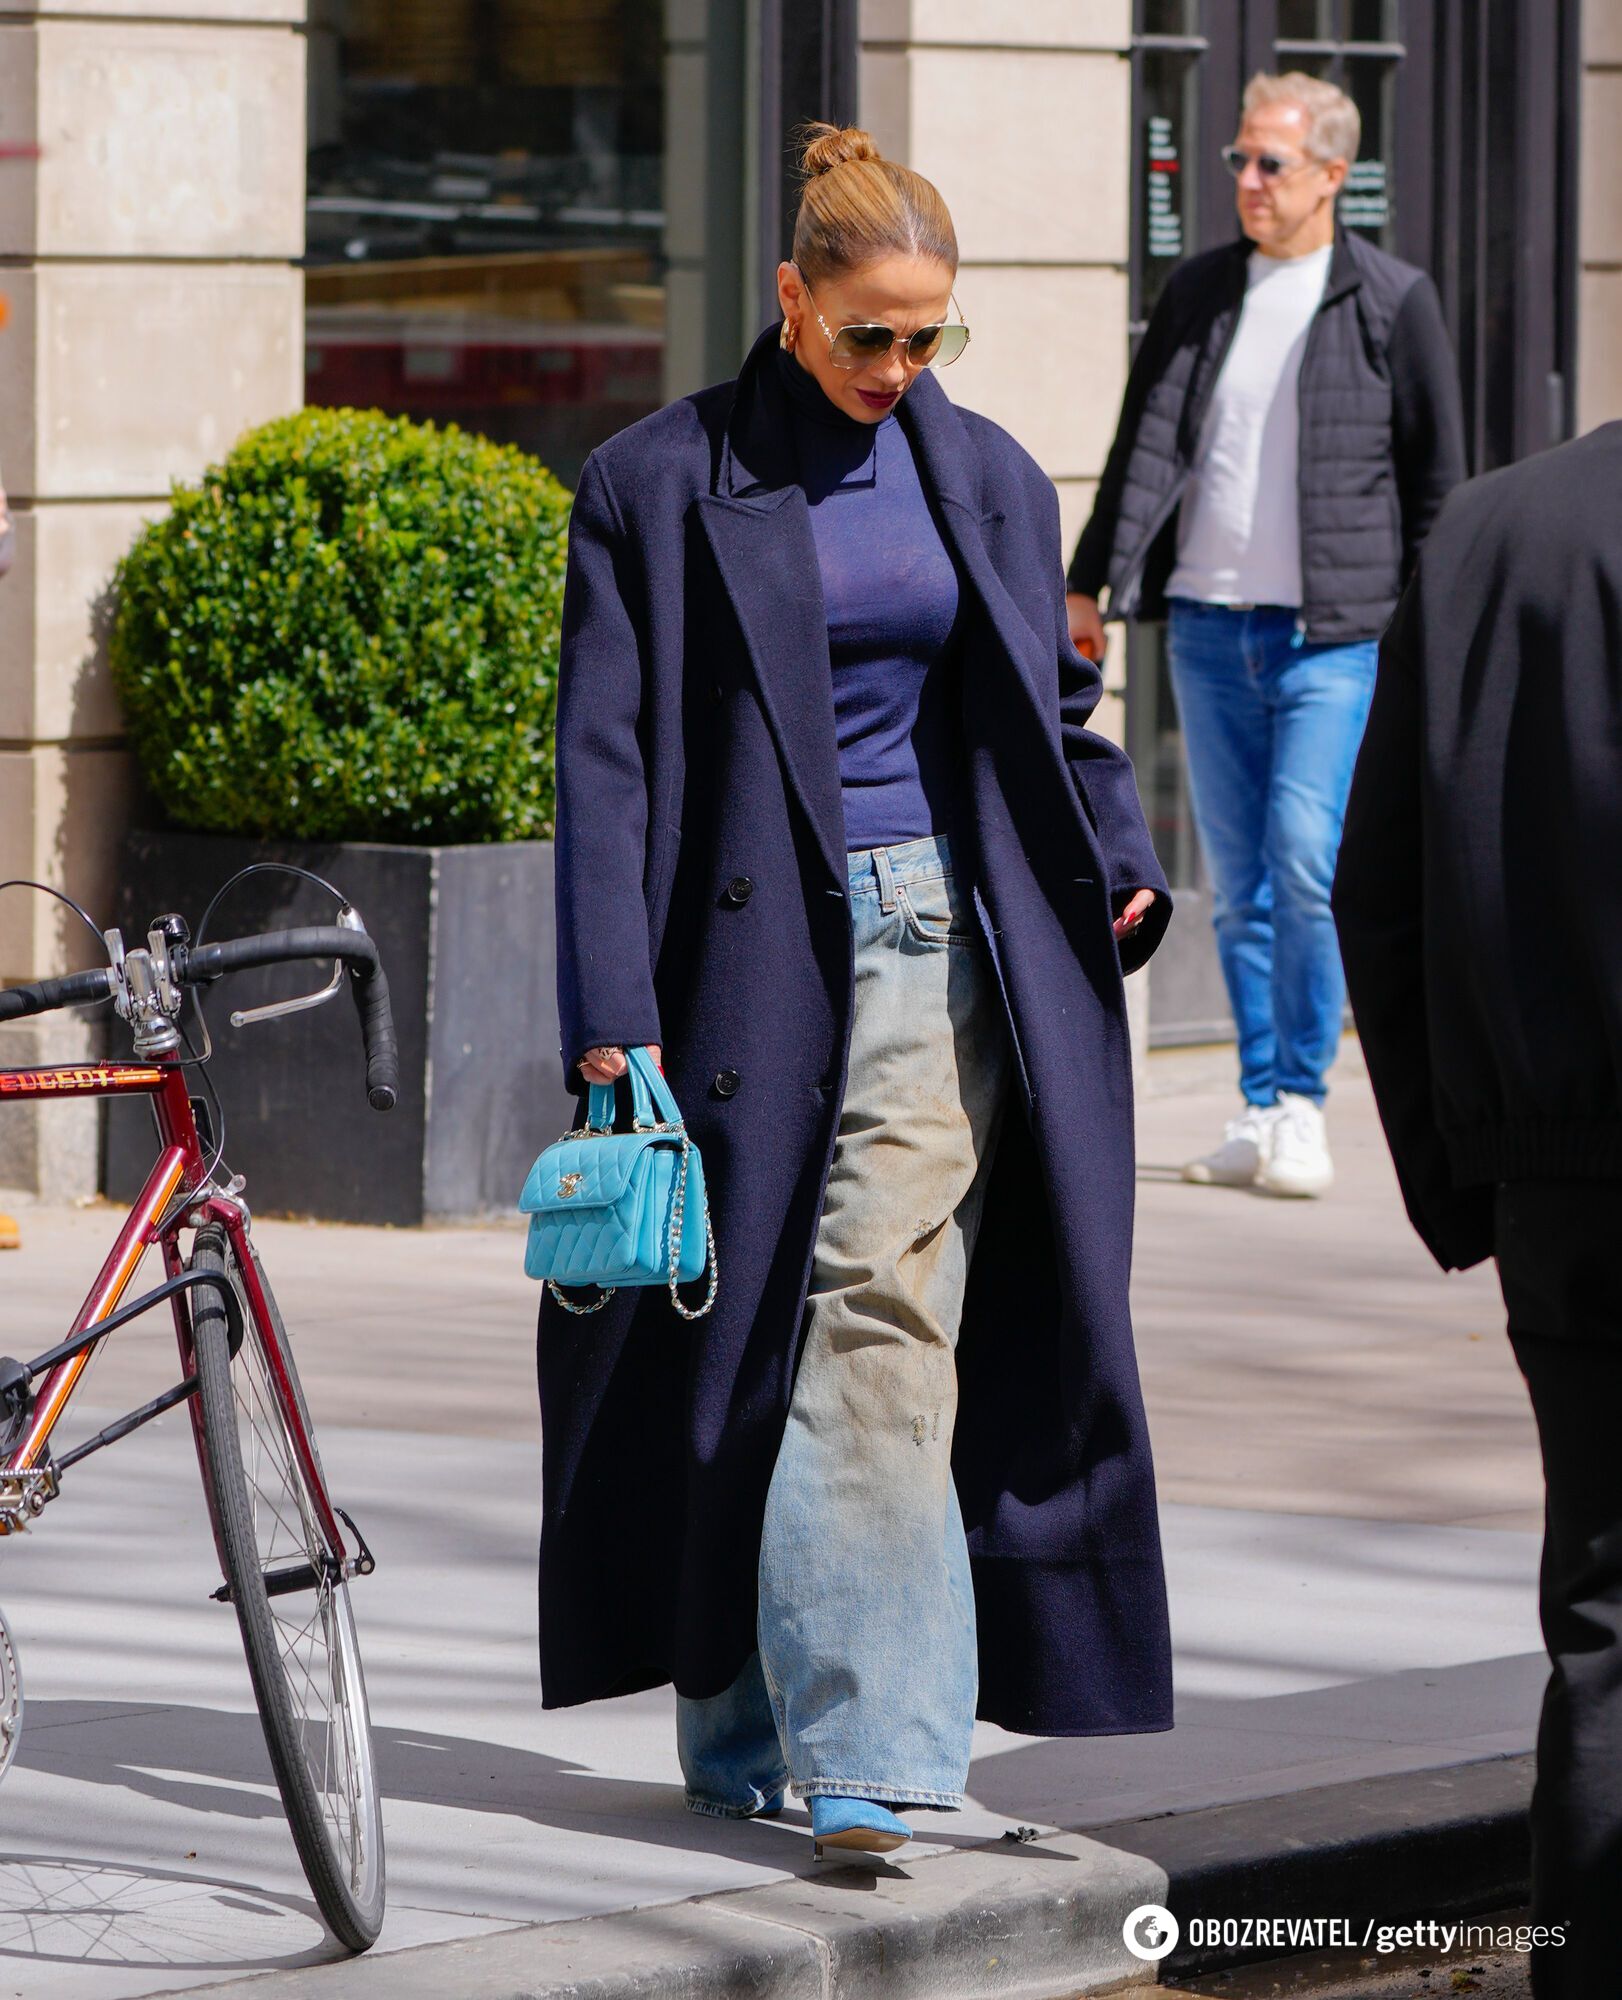 Jennifer Lopez joins the ''dirty denim'' trend of the 90s, showing off popular jeans